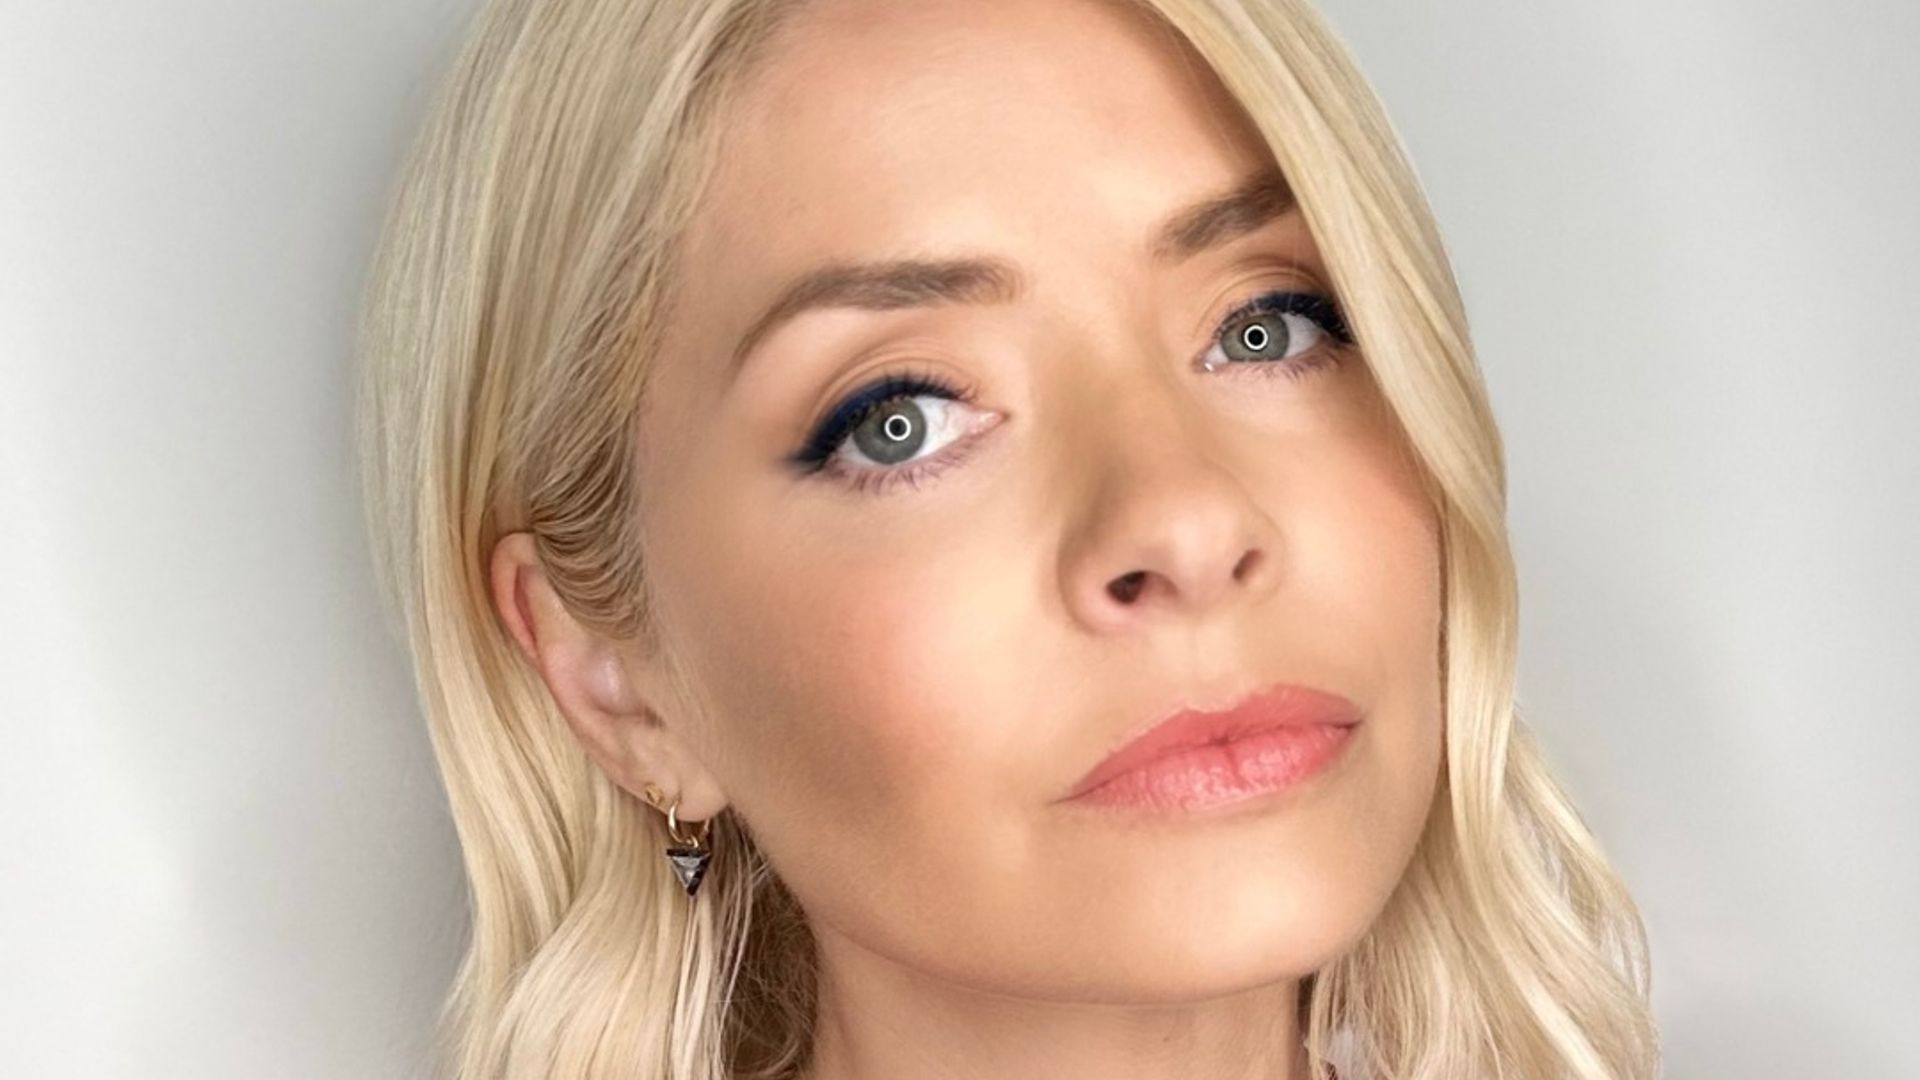 Holly Willoughby showing off her eye makeup in a closeup photo